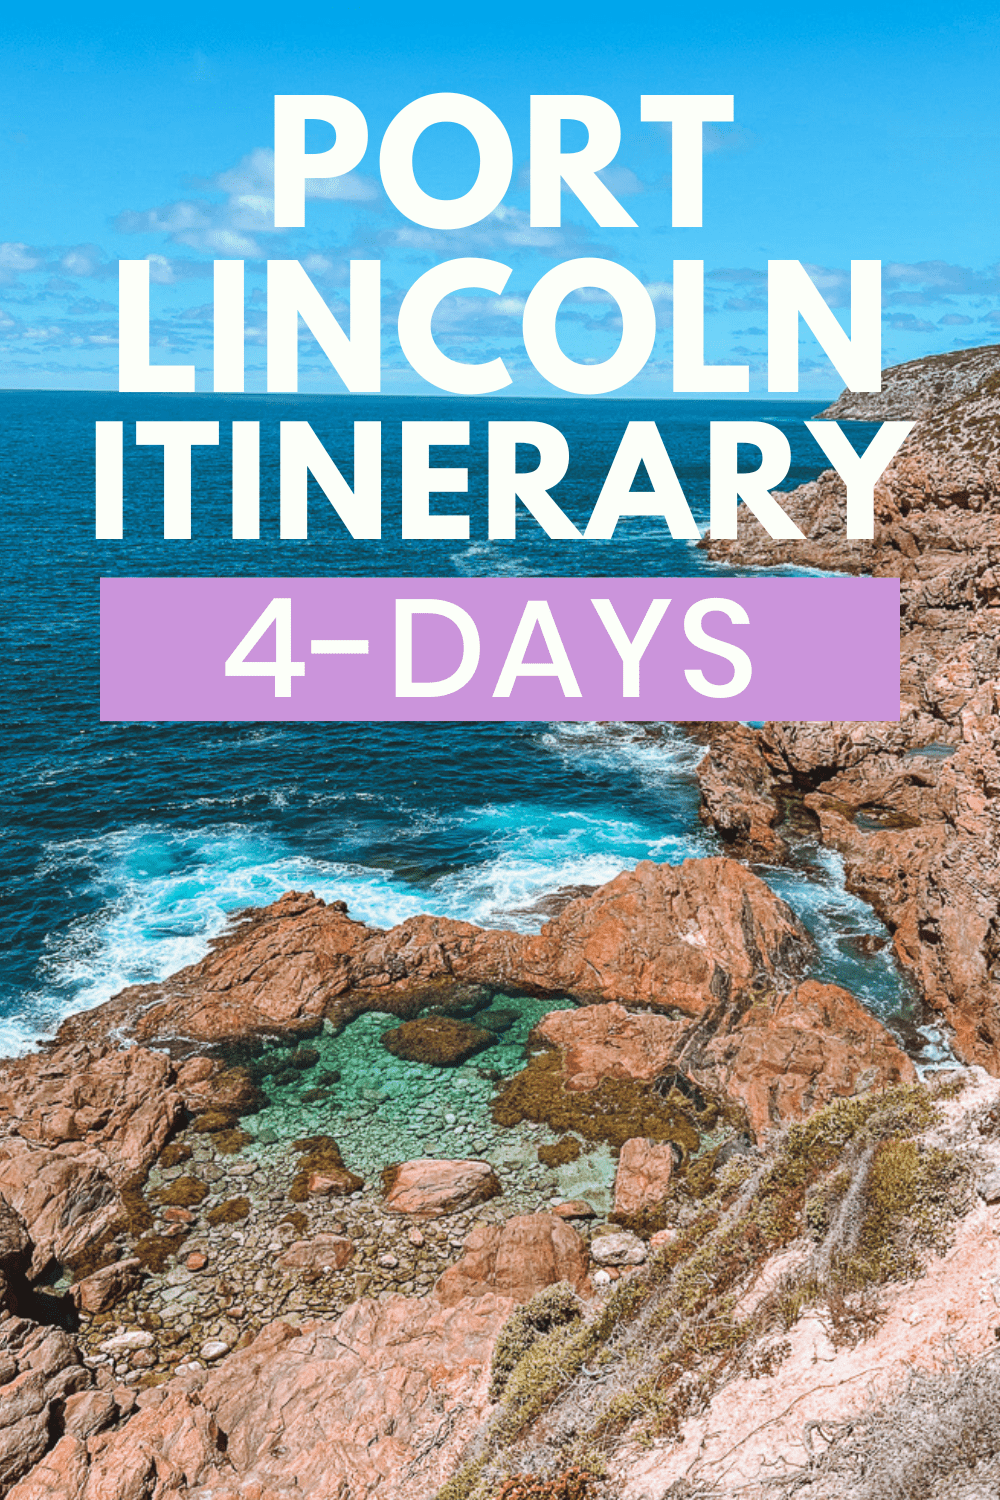 4 Days itinerary Port Lincoln with rock pool pin